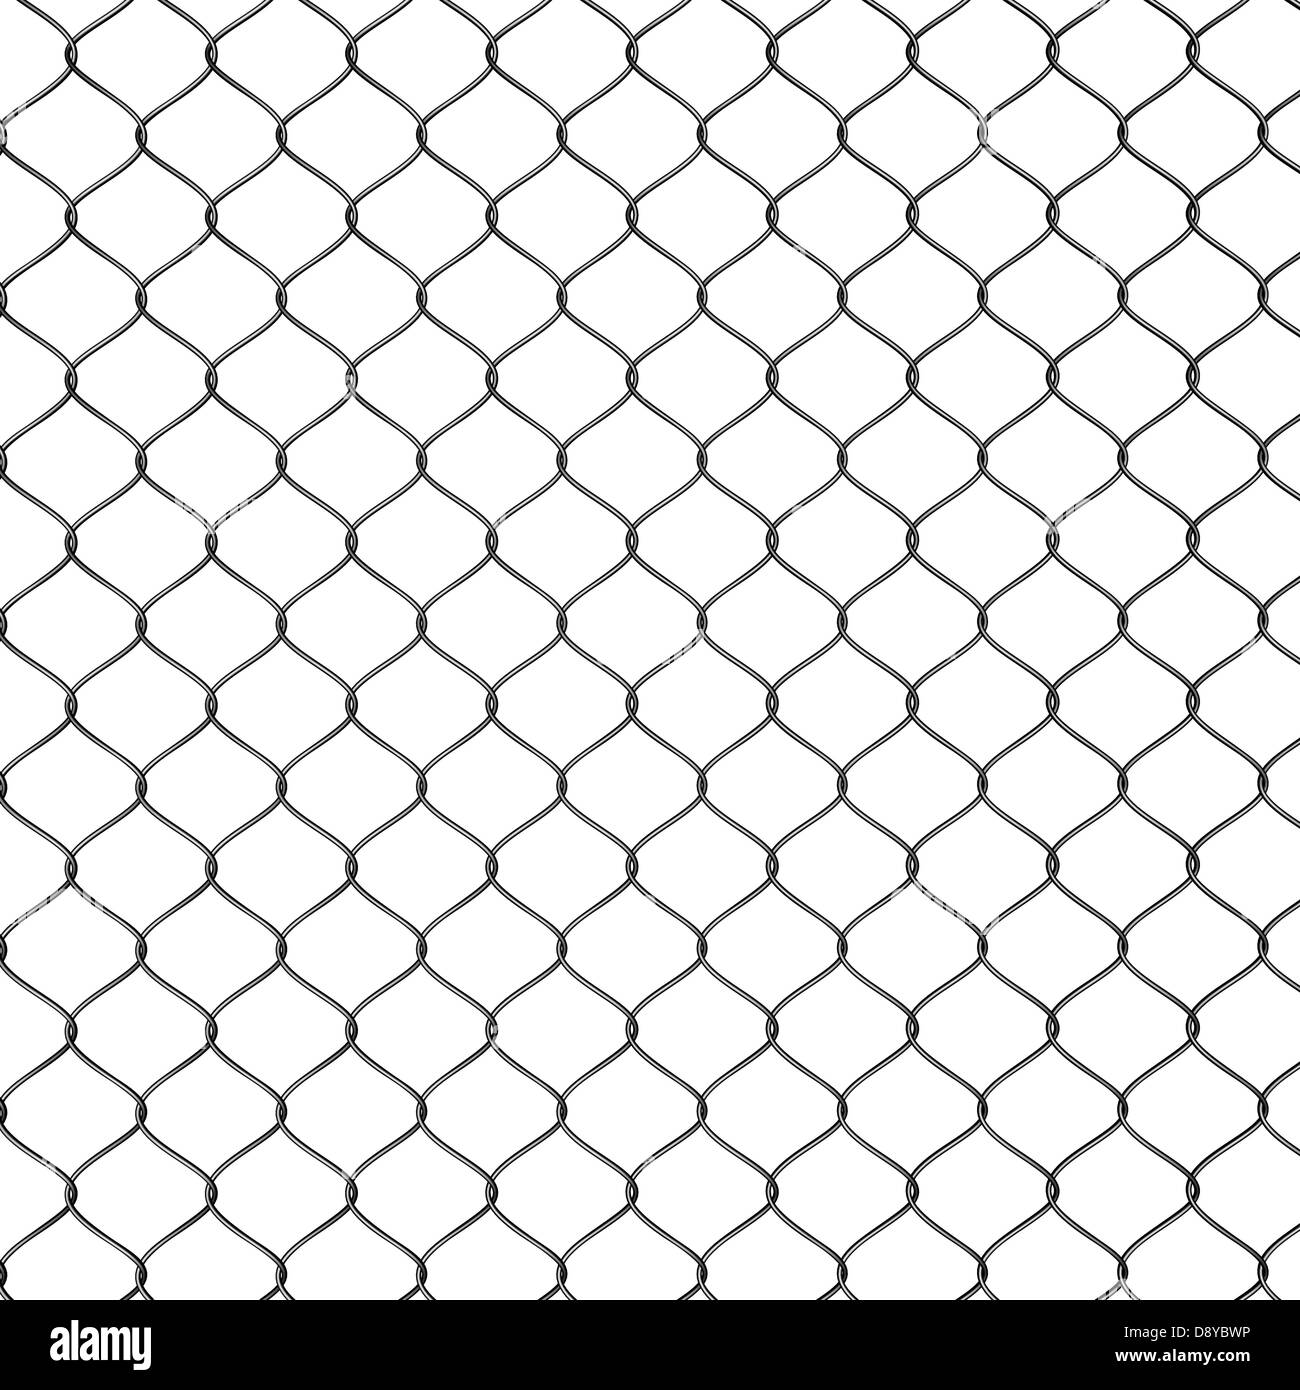 3d Render of a Chain Link Fence Stock Photo